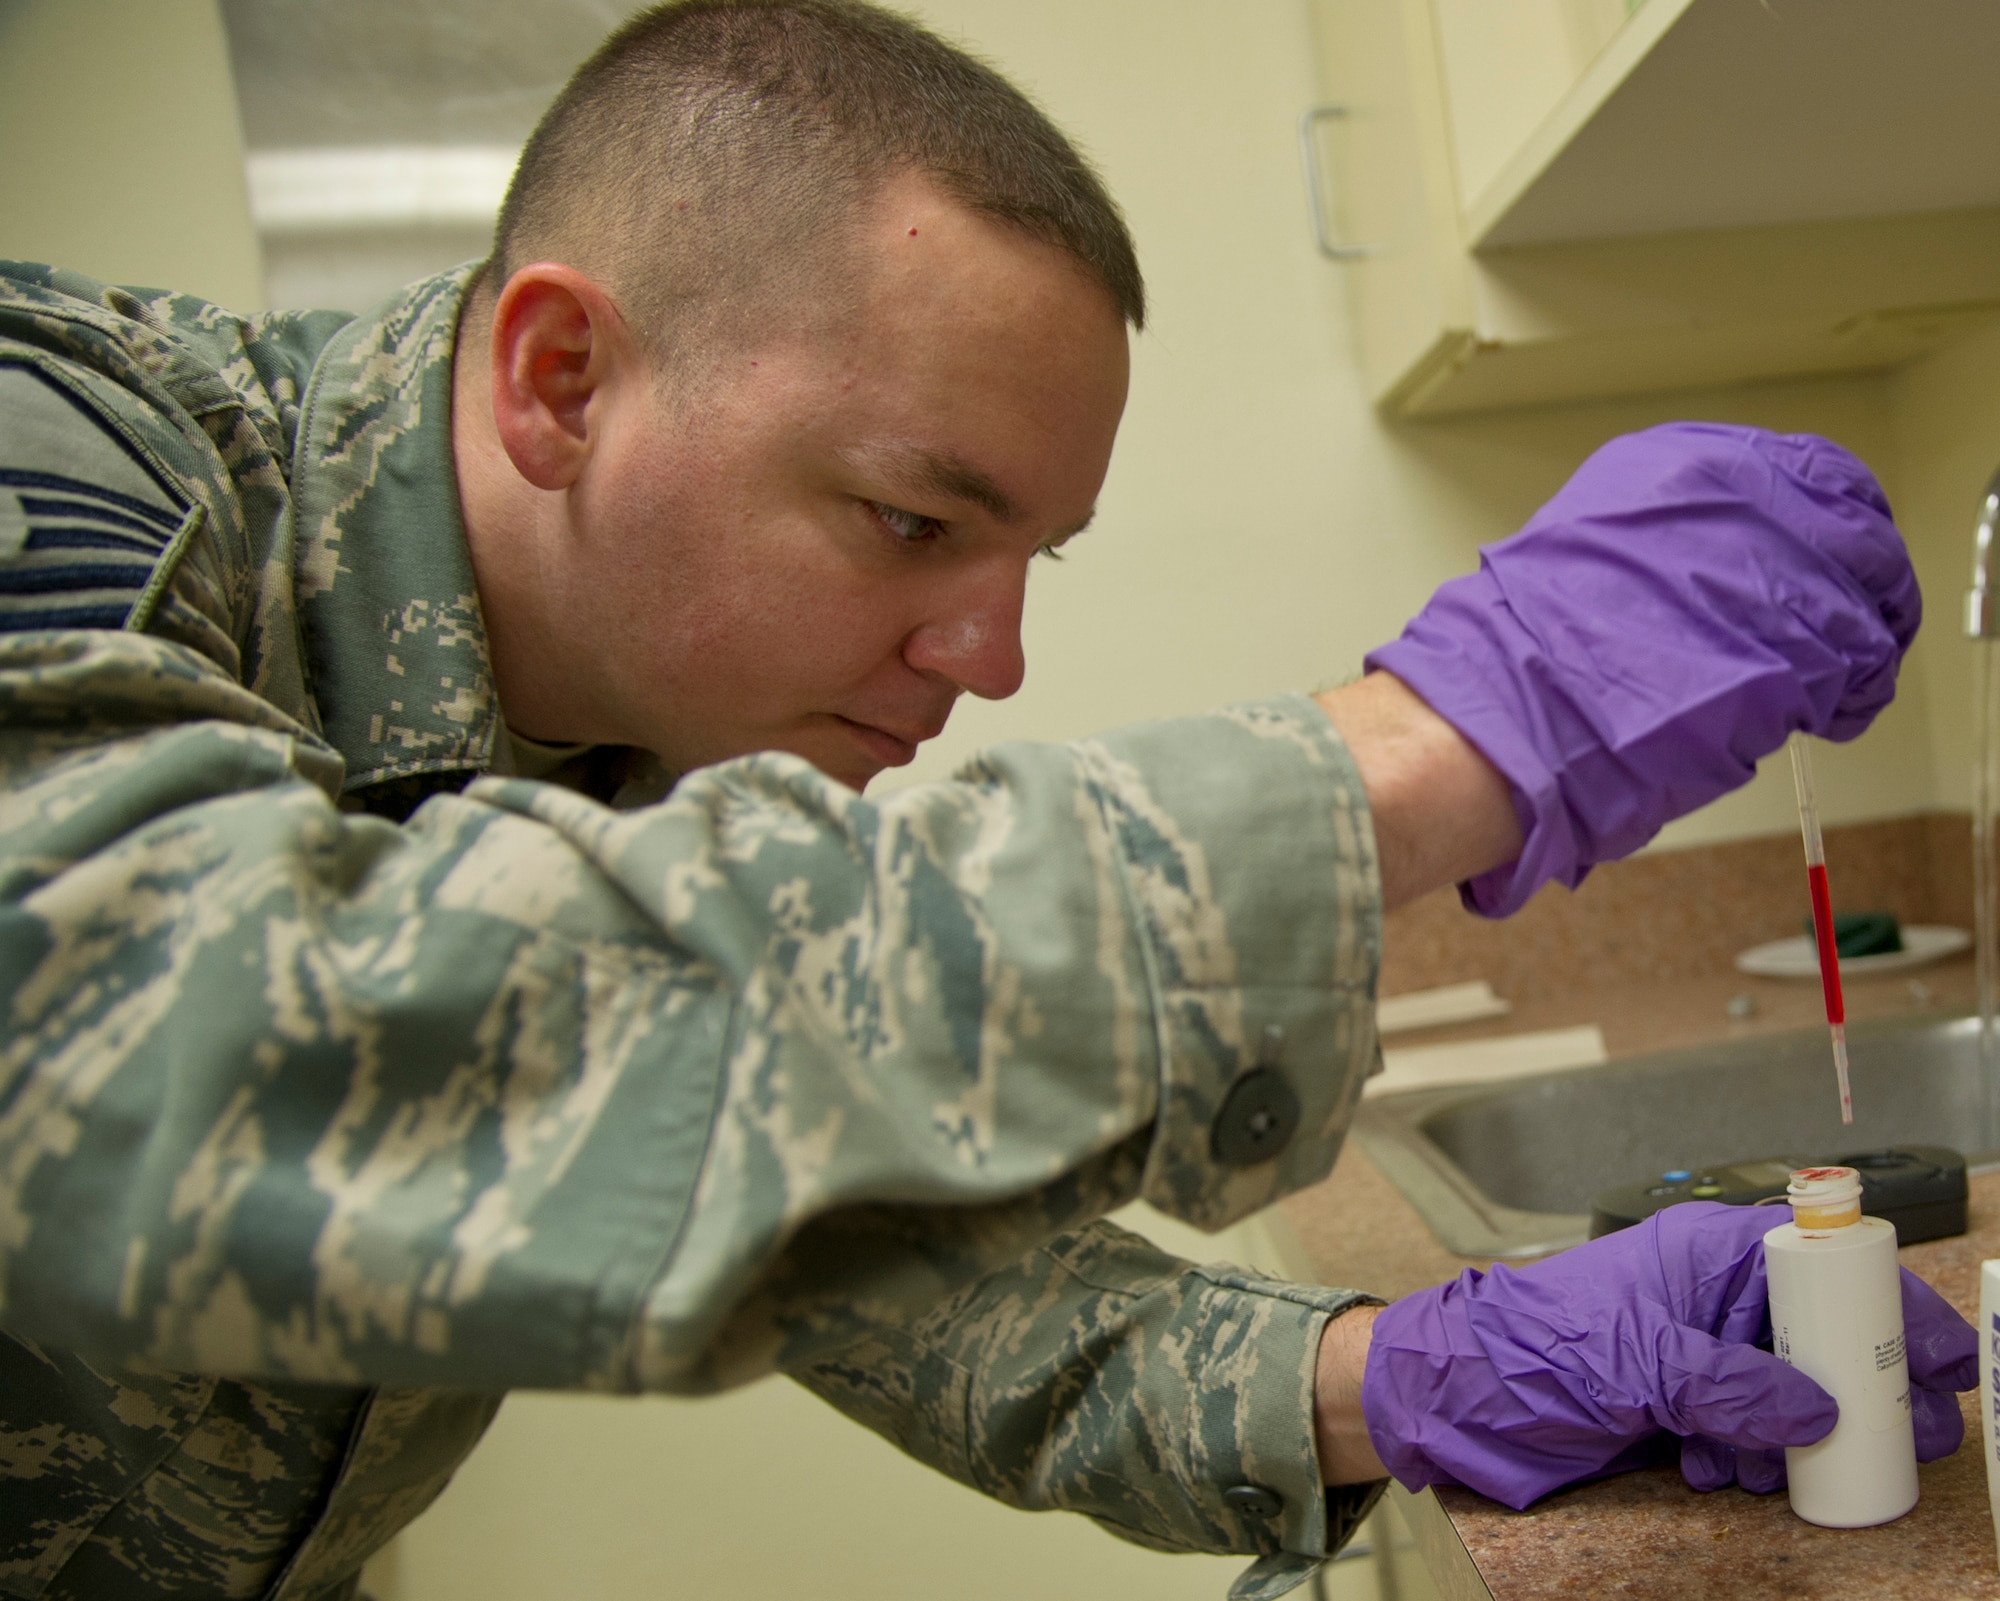 ALTUS AIR FORCE BASE, Okla. – Master Sgt. Kenneth Estes, 97th Medical Operations Squadron NCO in charge of bioenvironmental engineering, prepares to add Phenol Red Solution to a water sample, July 16, 2013 during a routine water sampling. Members of the 97th MDOS bioenvironmental engineering flight routinely monitor for the presence of drinking water contaminants. The base receives its drinking water from the City of Altus water treatment plant. (U.S. Air Force photo by Senior Airman Kenneth W. Norman / Released)